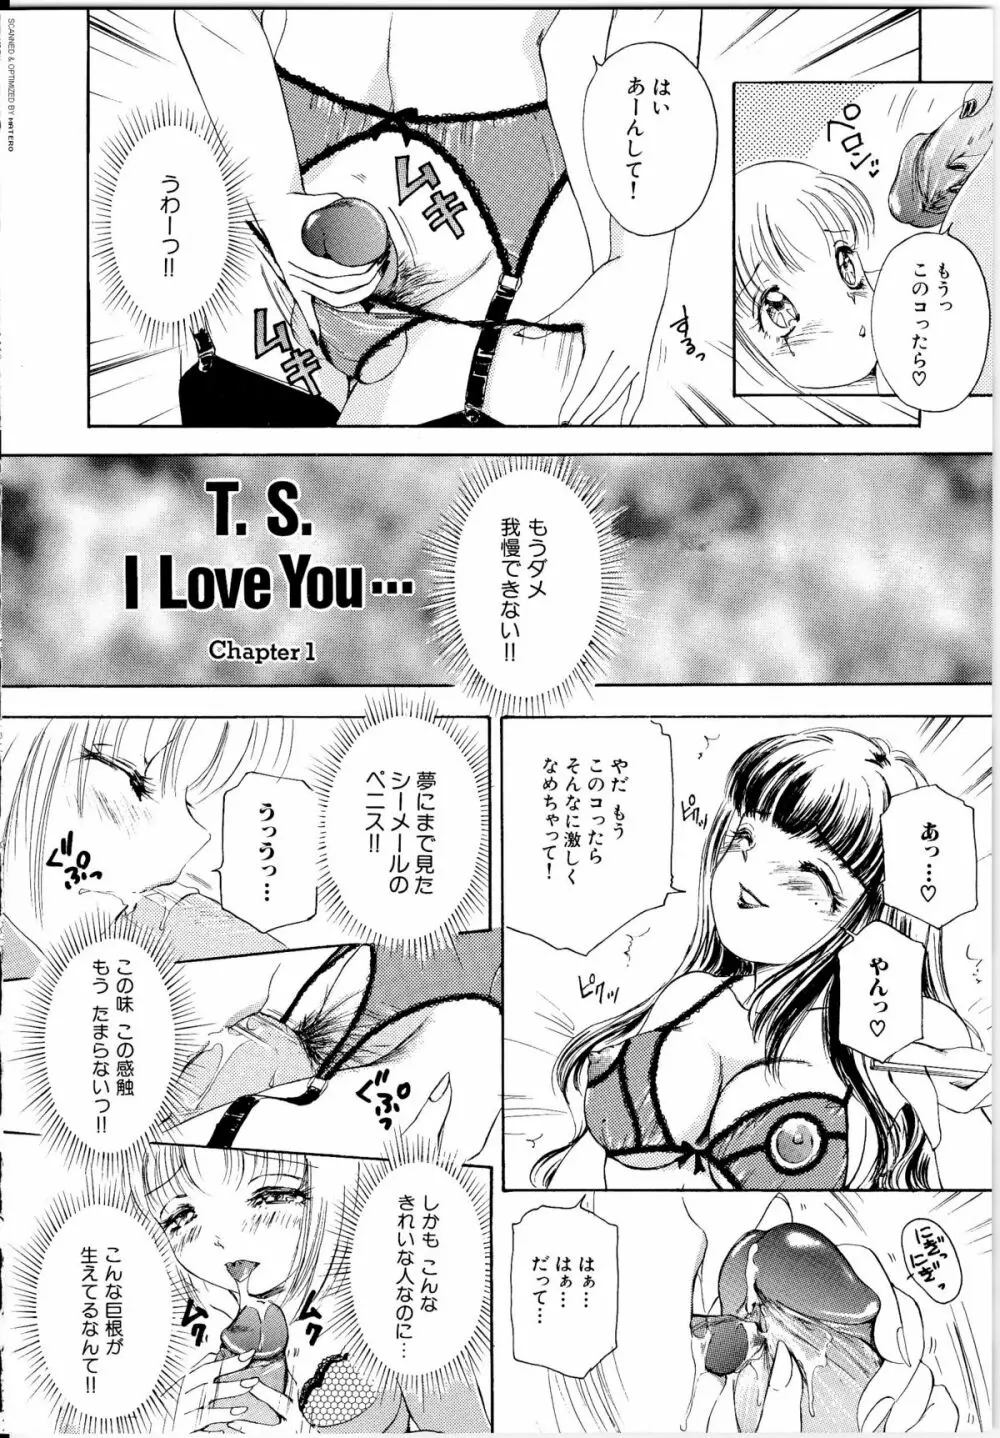 T.S. I LOVE YOU… 7ページ